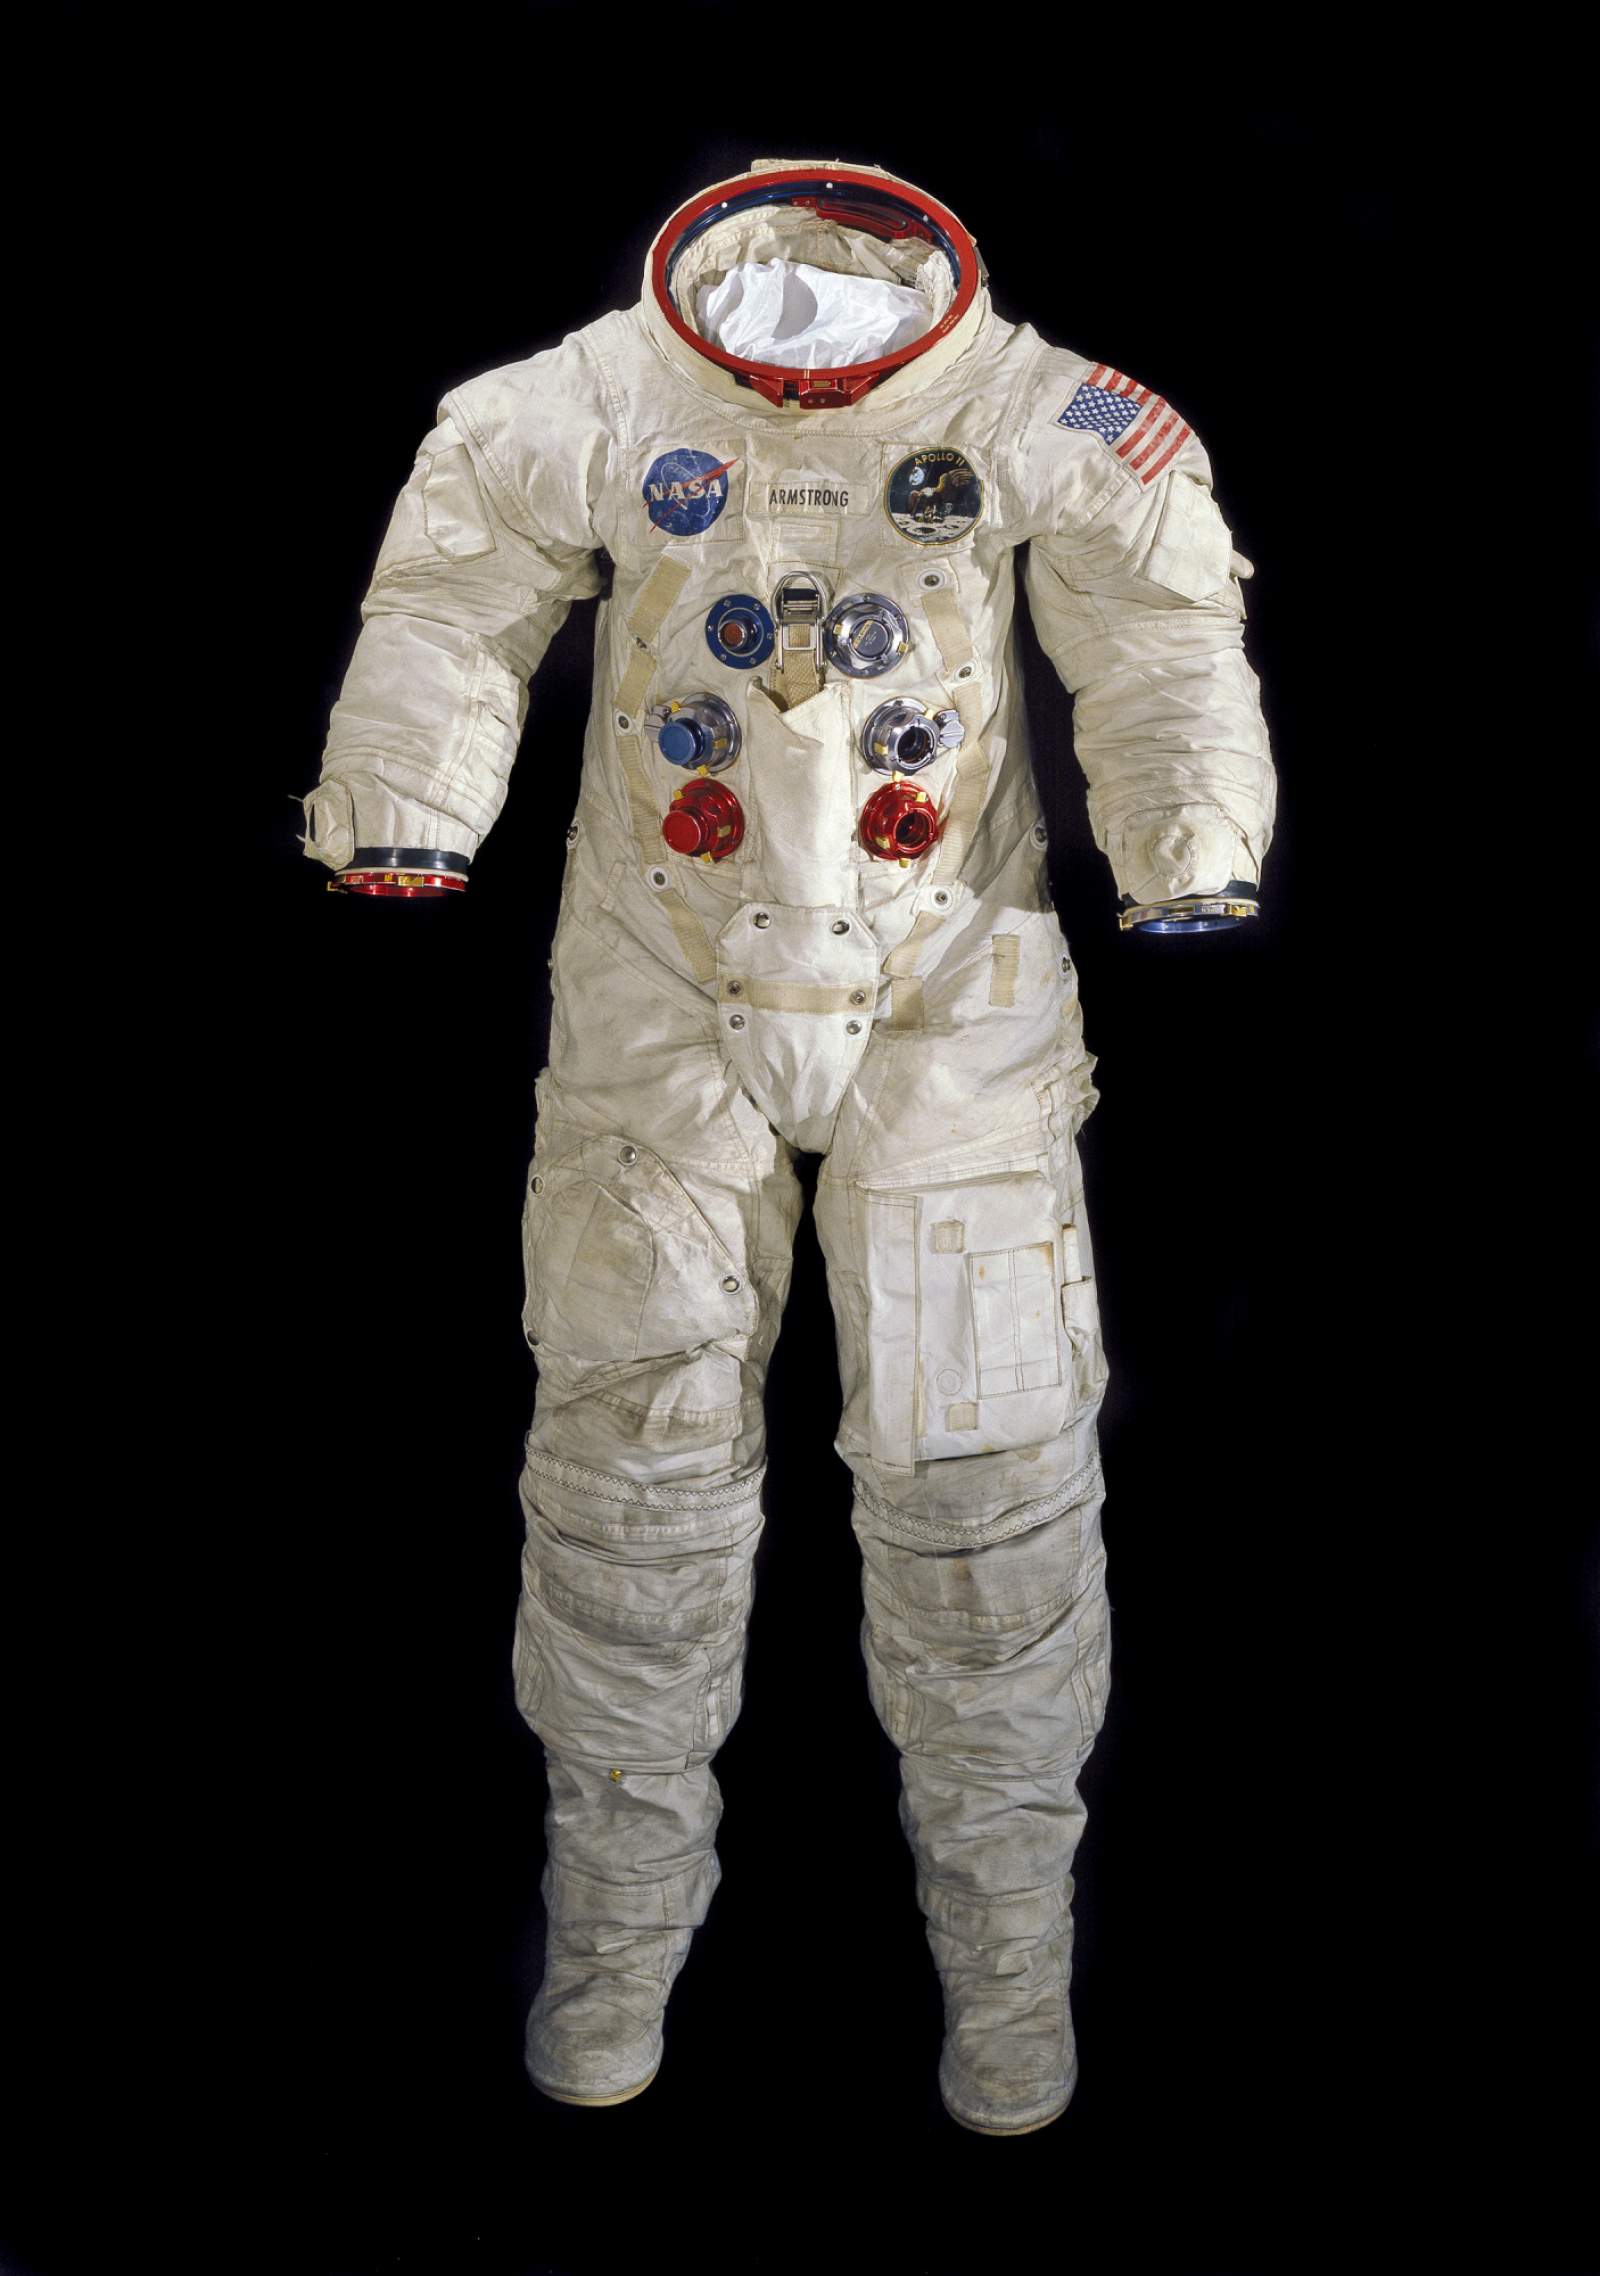 From Apollo to Mars: The Evolution of Spacesuits | Space